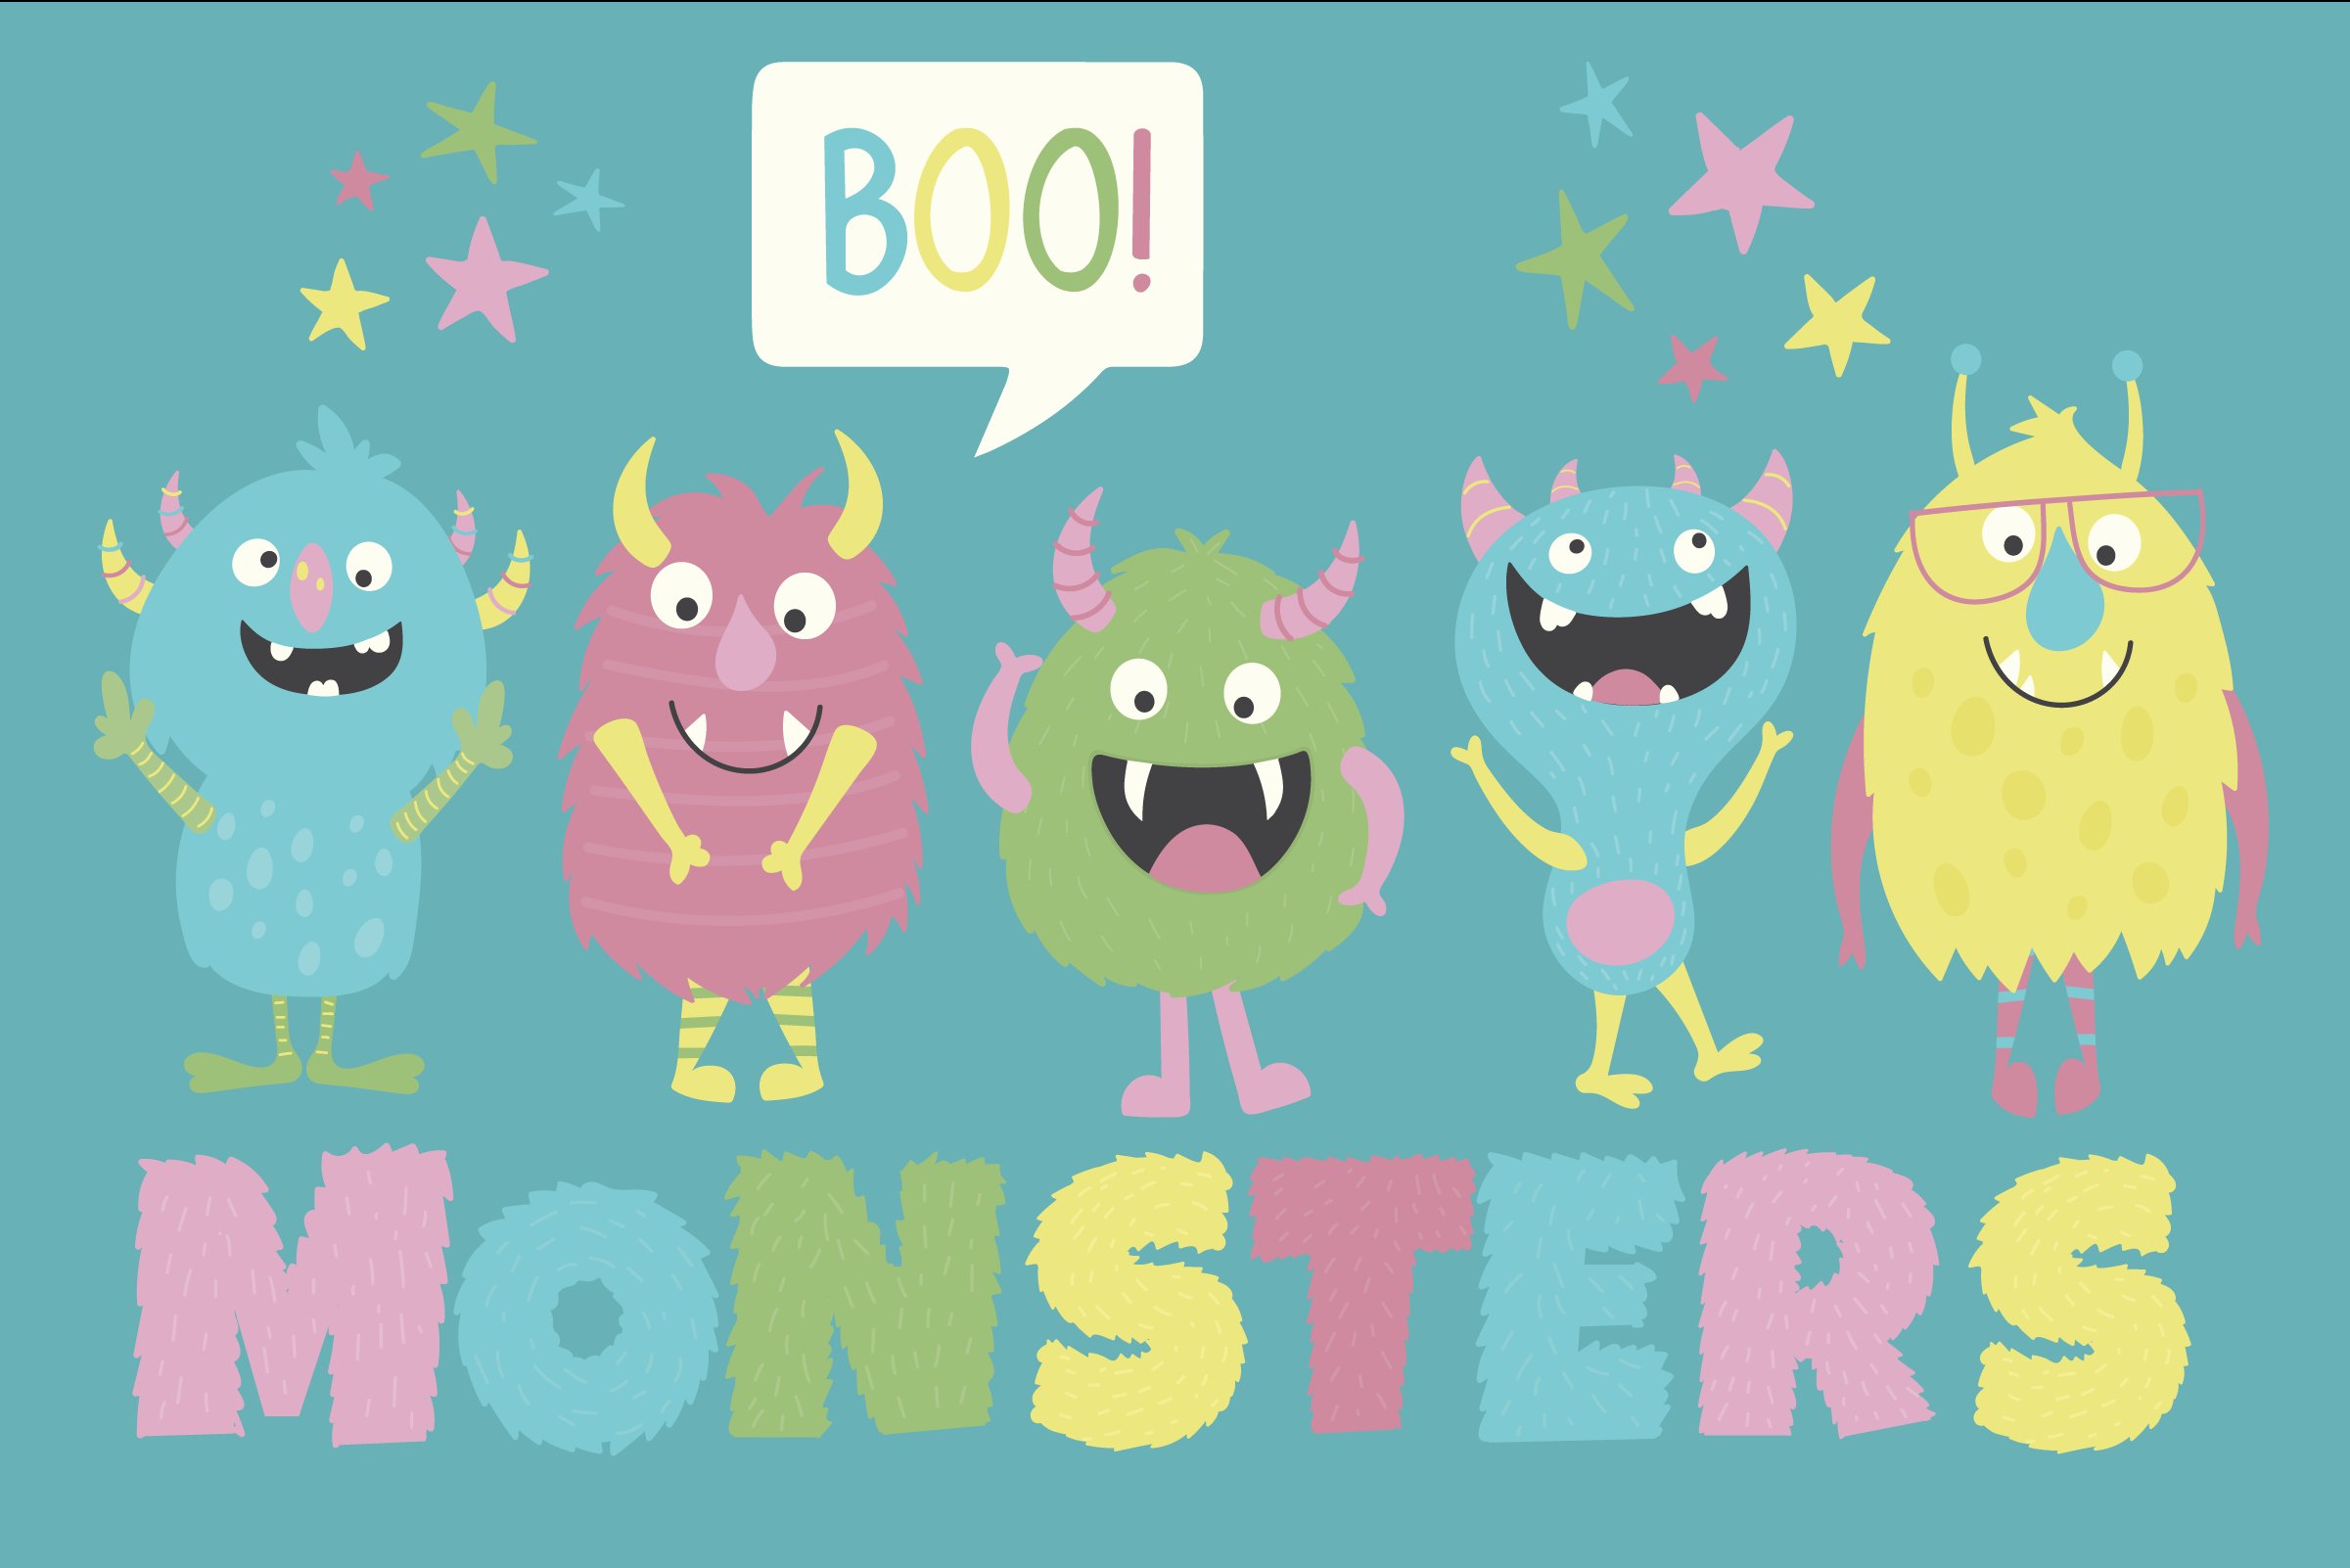 Monsters cover image.